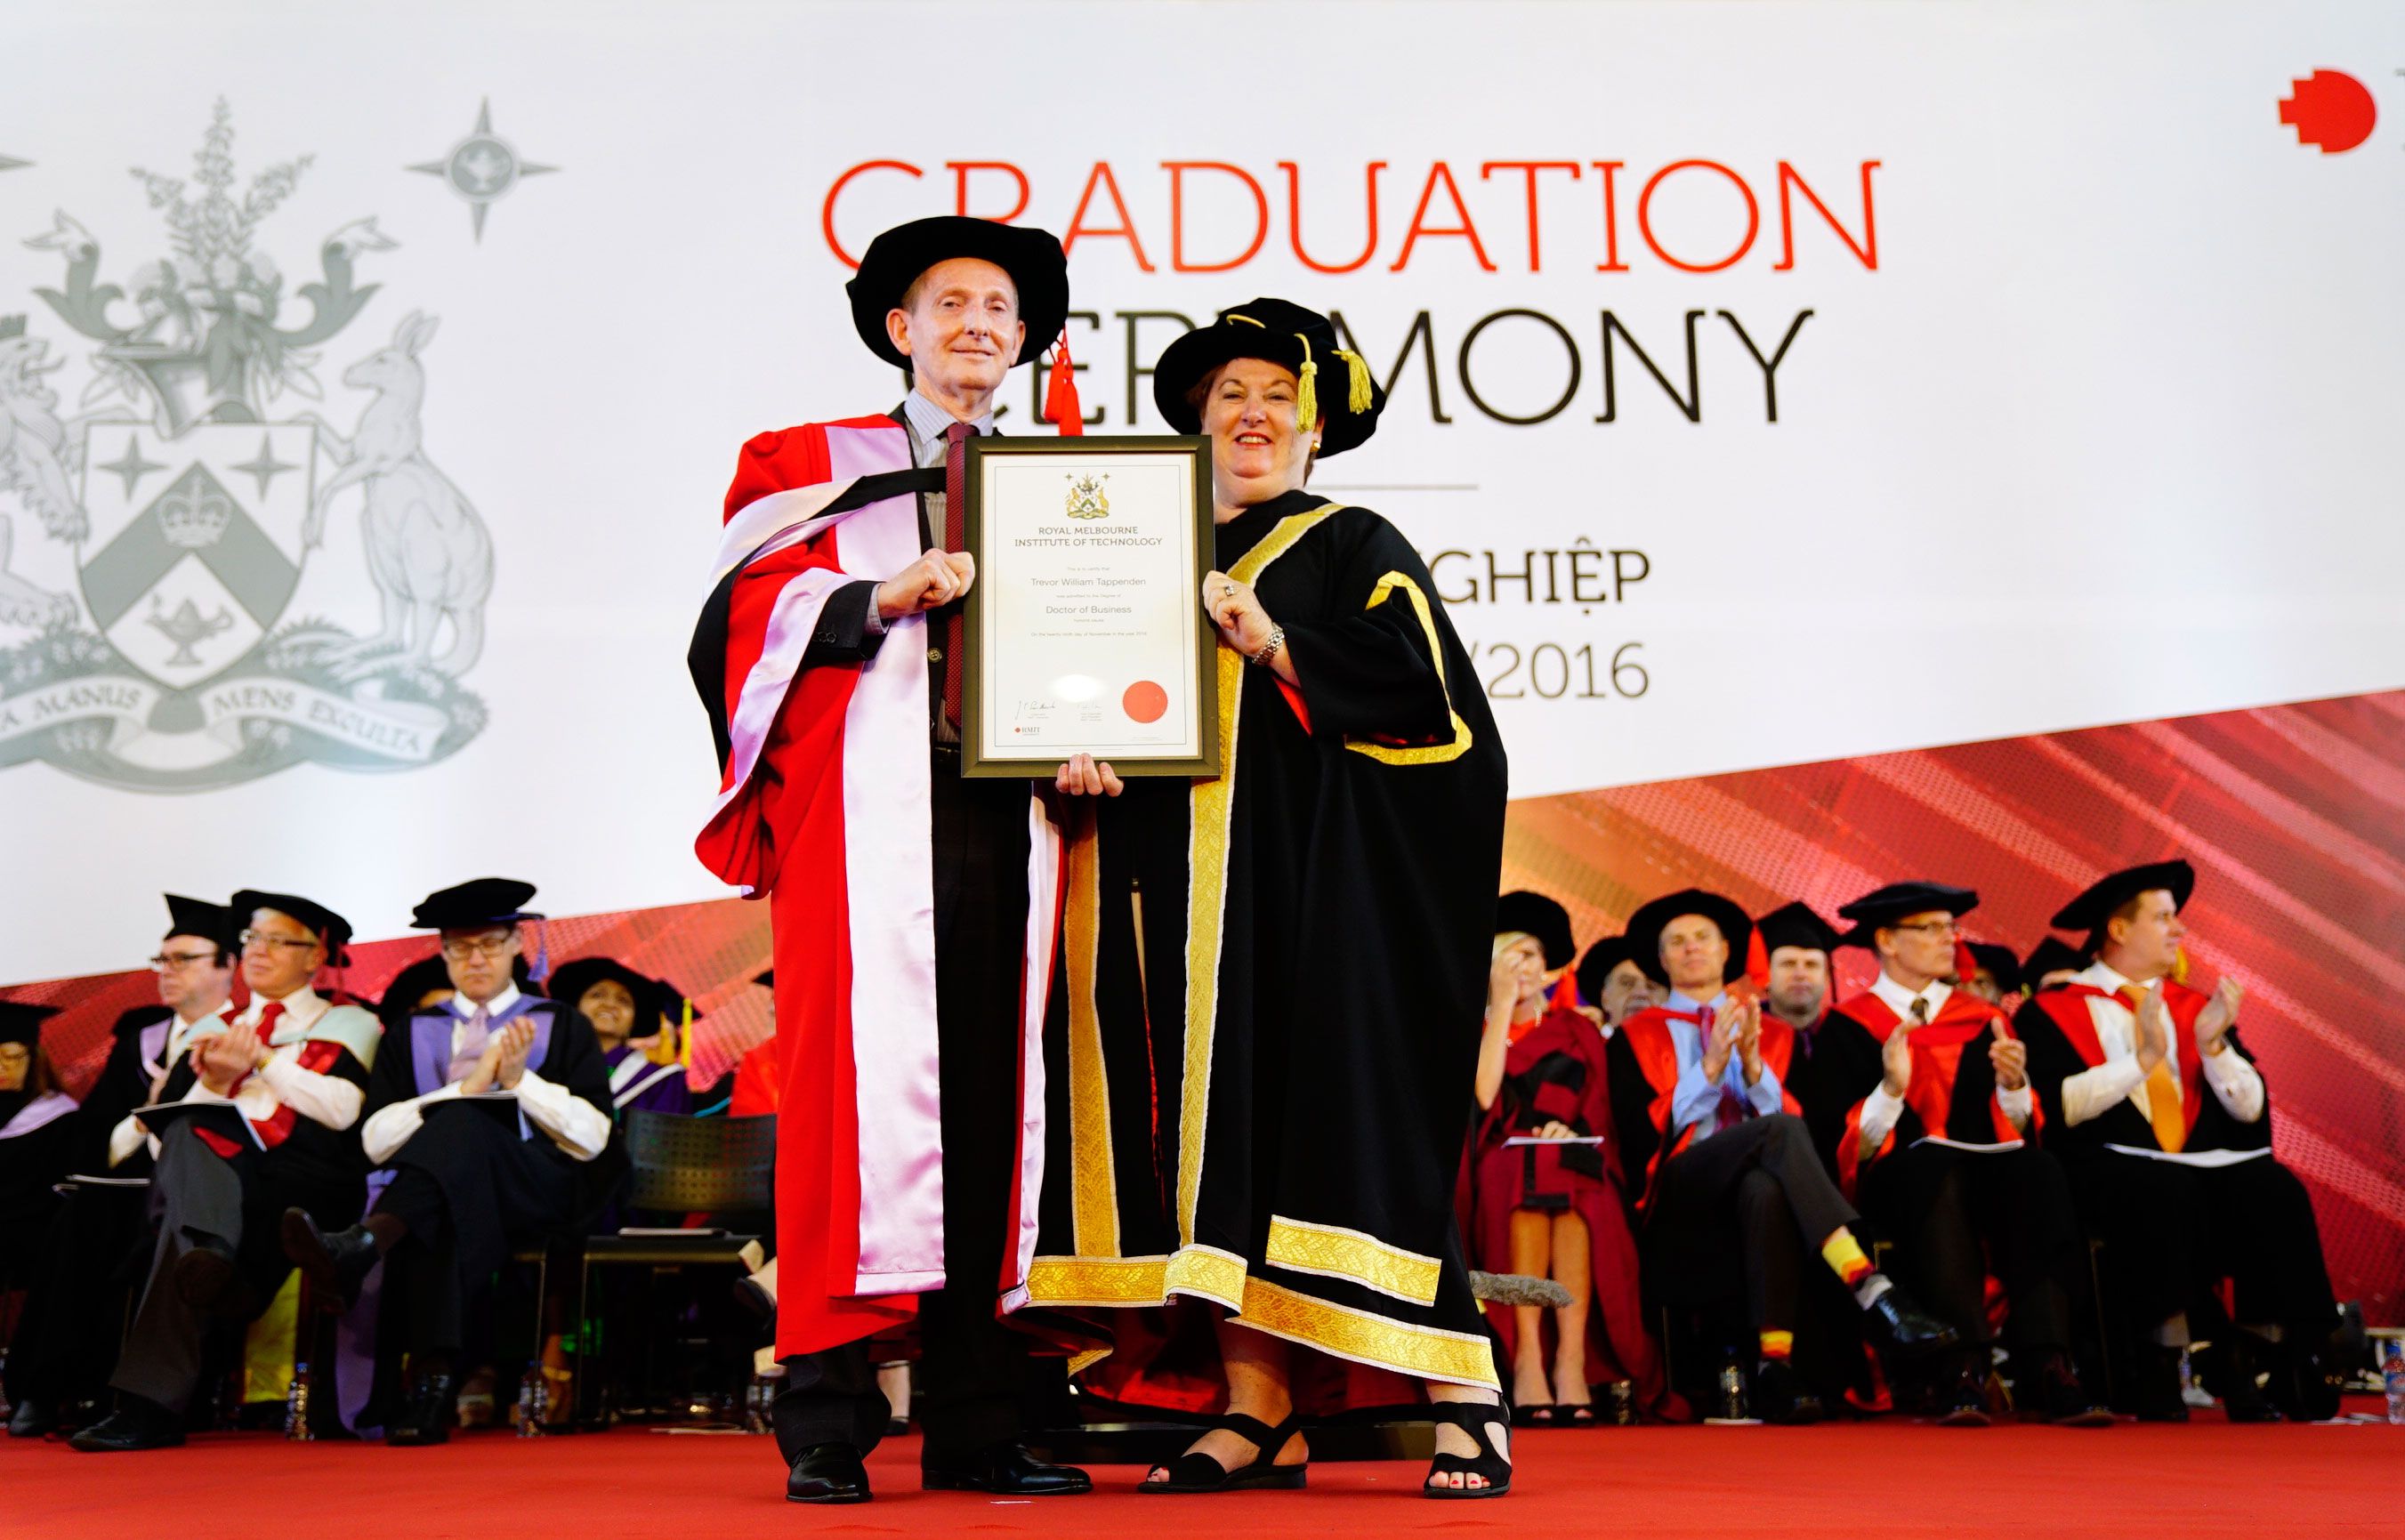 Mr Trevor Tappenden is awarded an Honorary Doctorate at RMIT Vietnam’s 2016 graduation ceremonies.